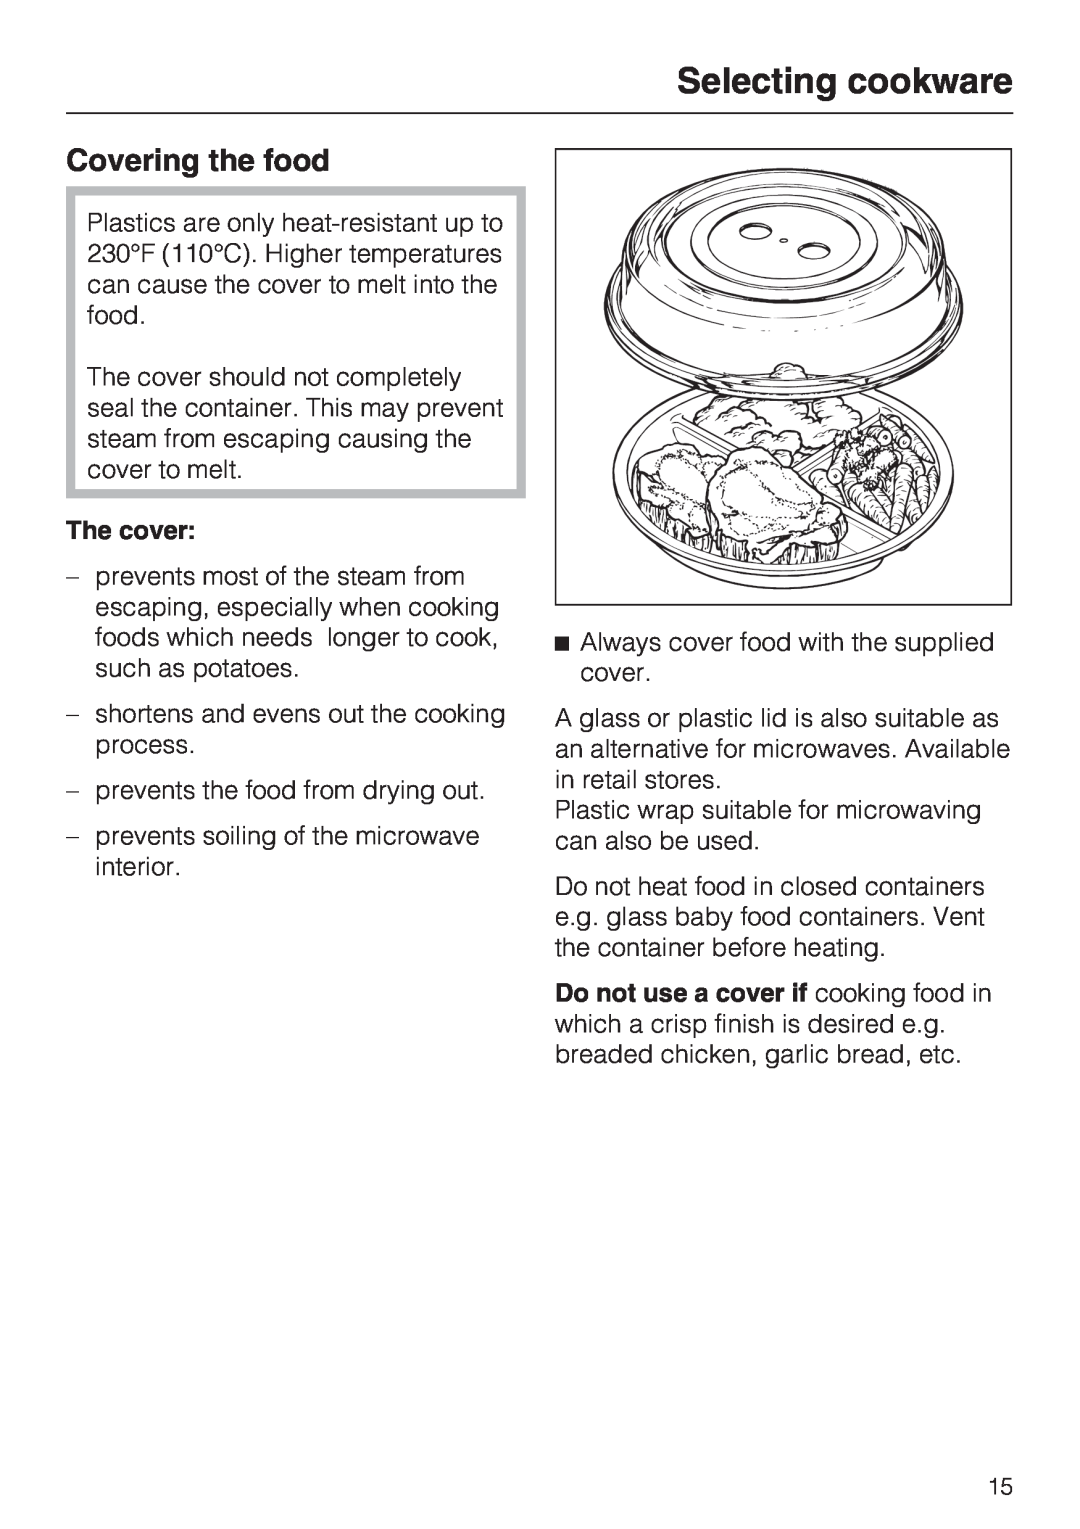 Miele M8260-1 installation instructions Covering the food, The cover, Selecting cookware 